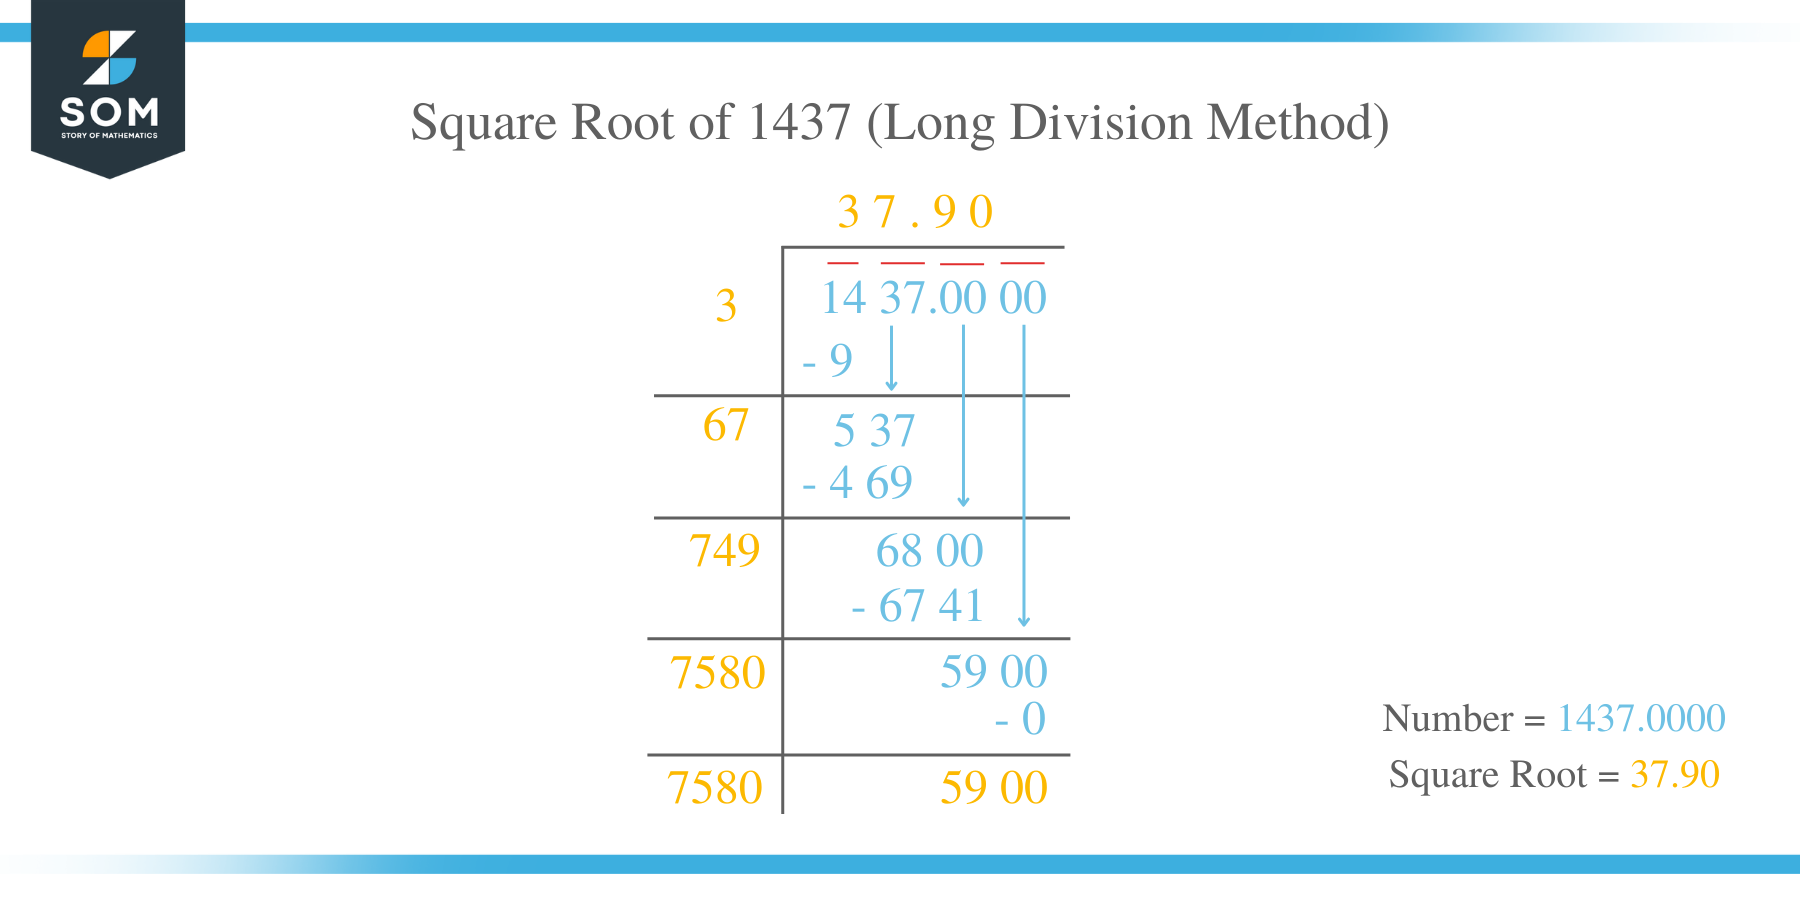 Square Root of 1437 by Long Division Method